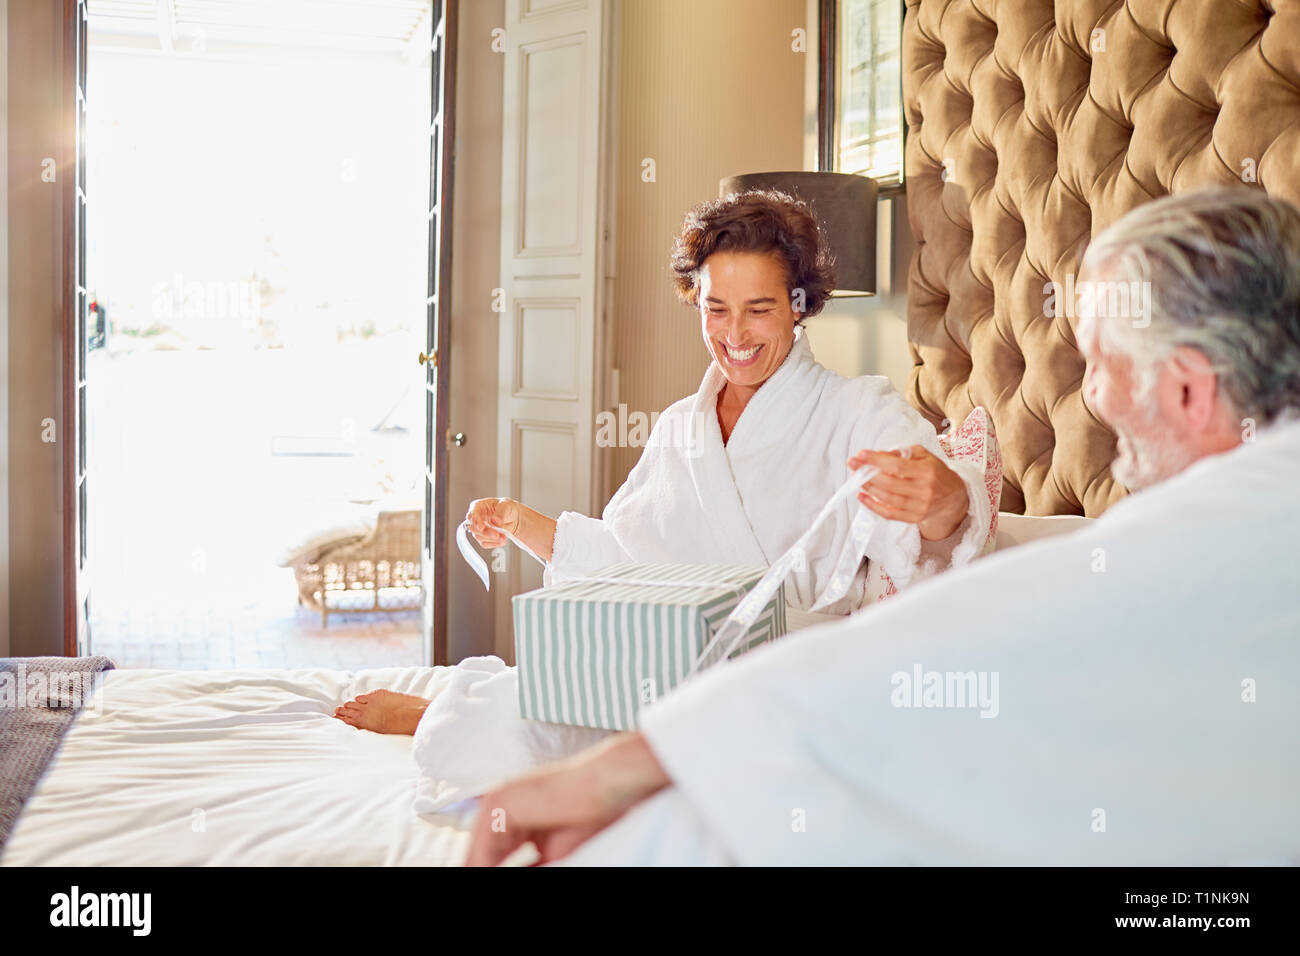 Husband watching happy wife opening gift on hotel bed Stock Photo